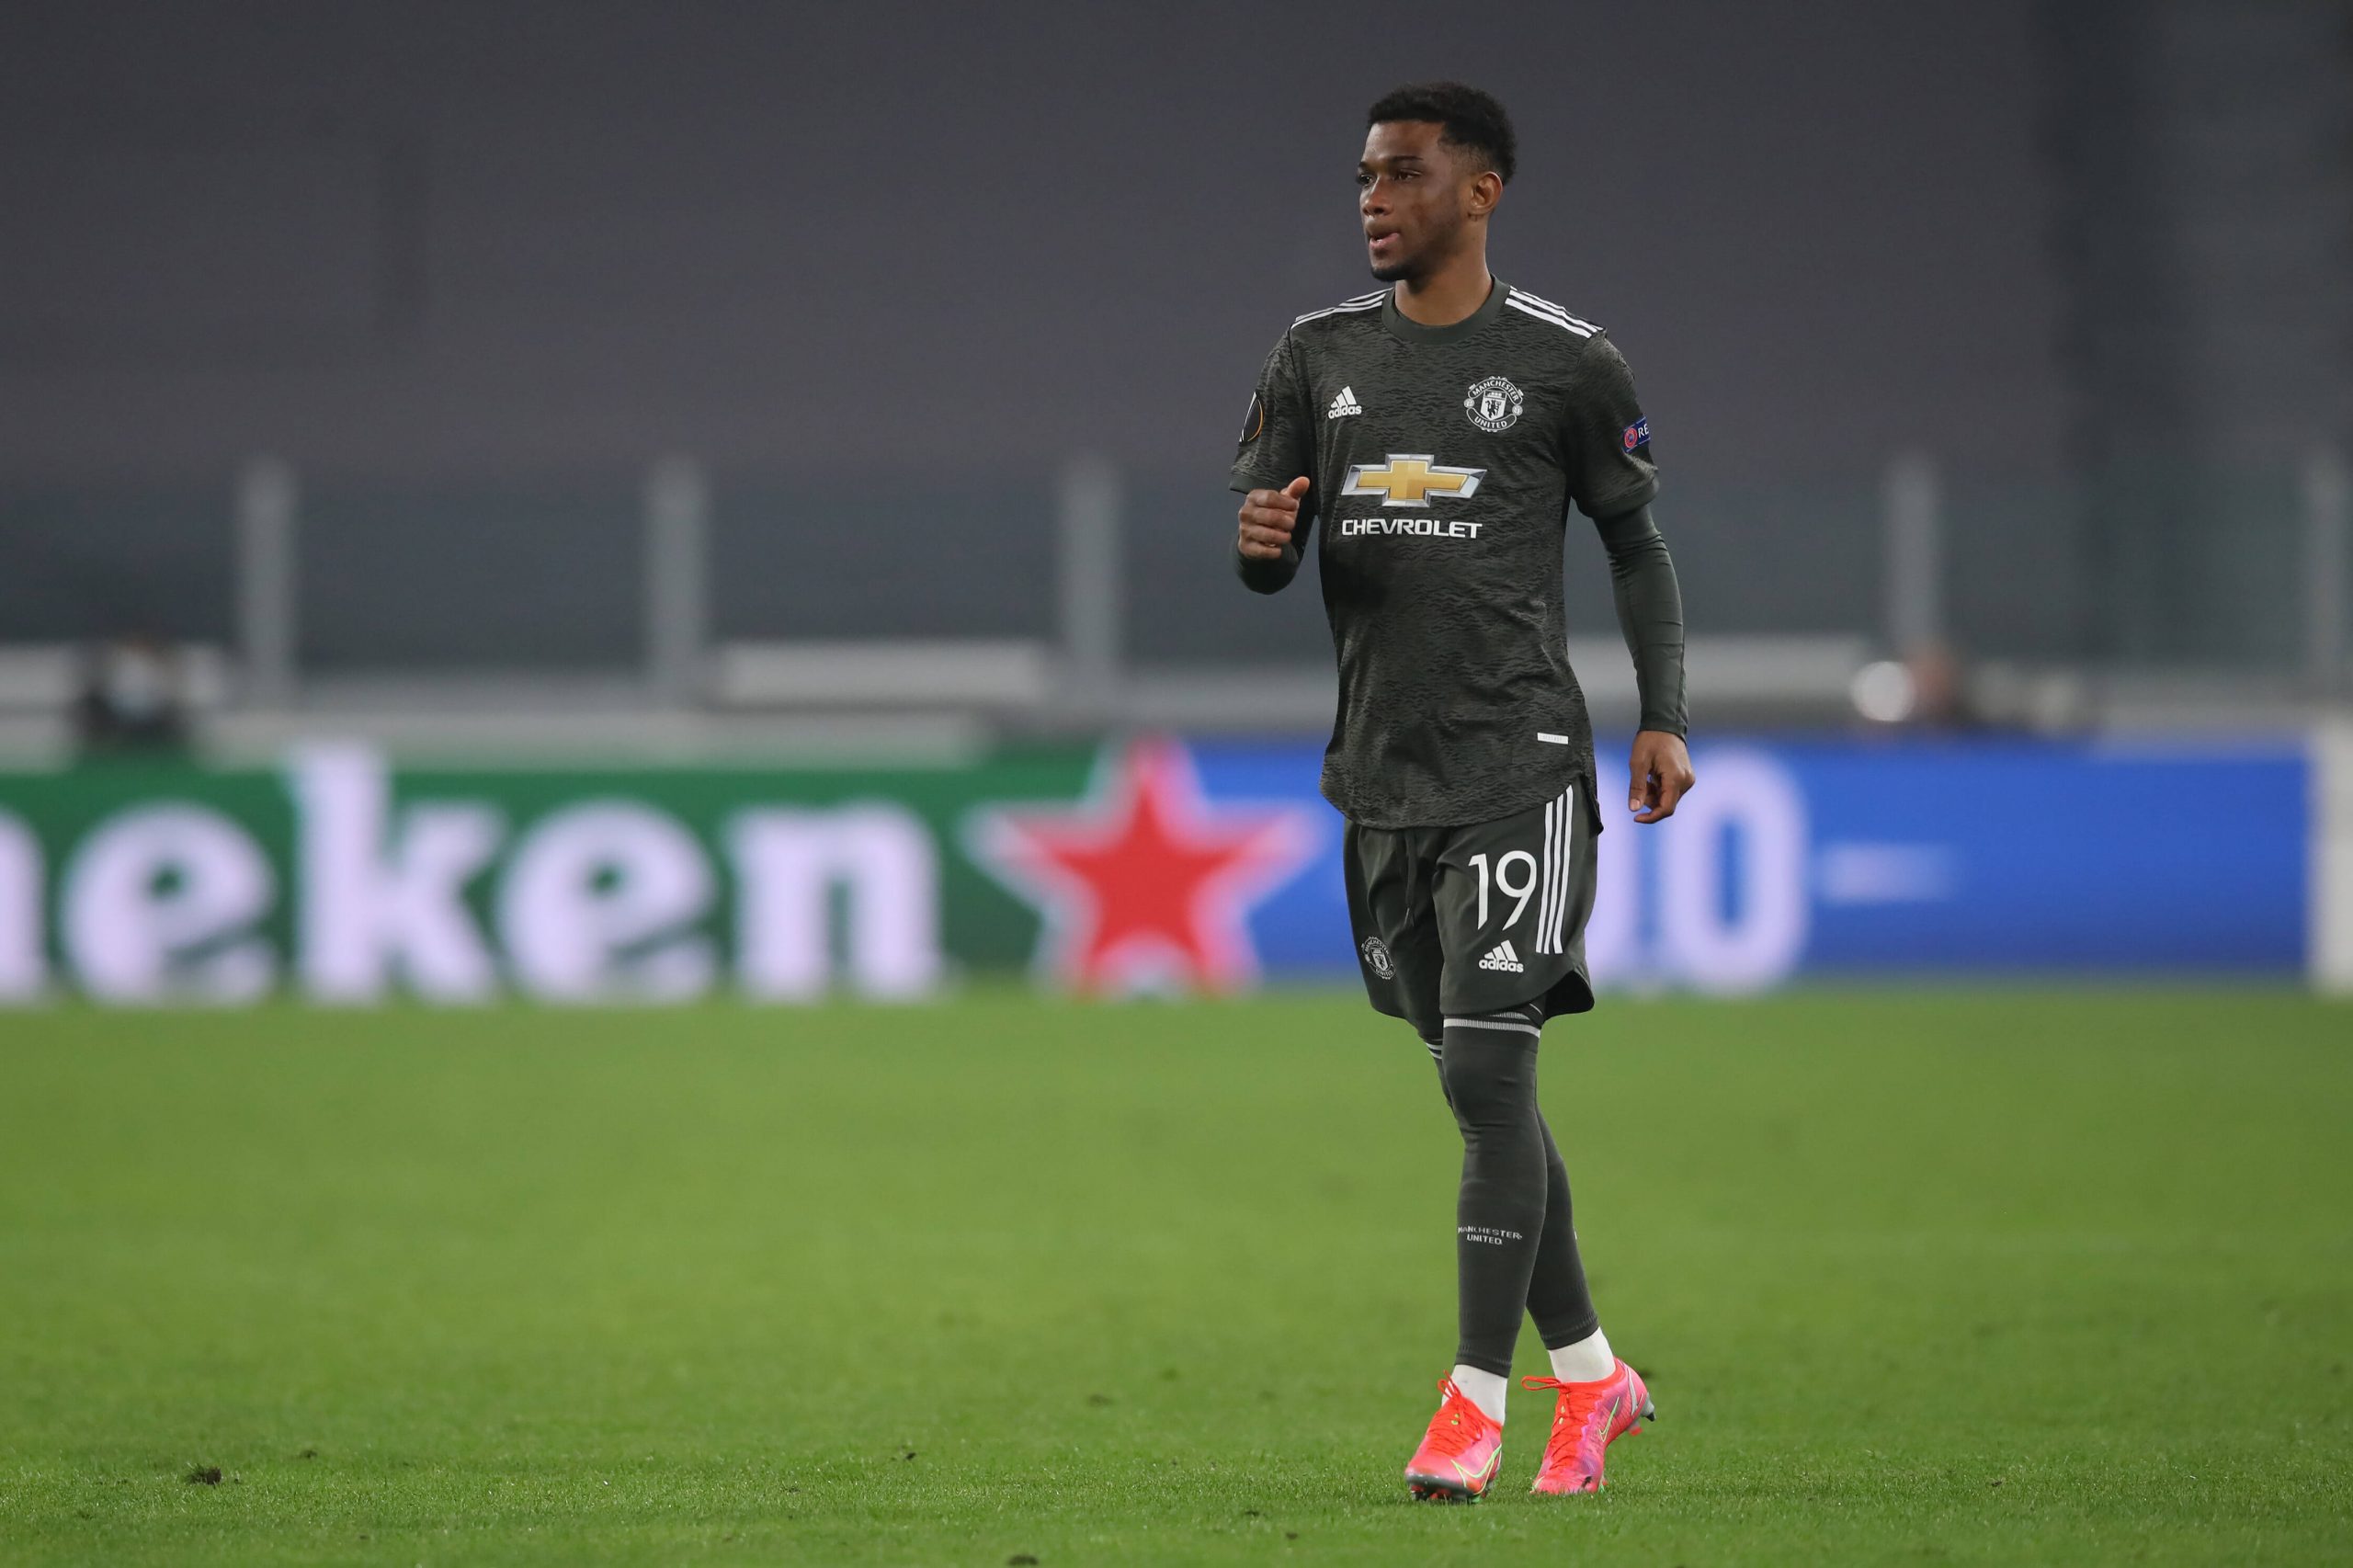 Amad Diallo in action for Manchester United. (Image: Jonathan Moscrop/Sportimage SPI-0911-0130)